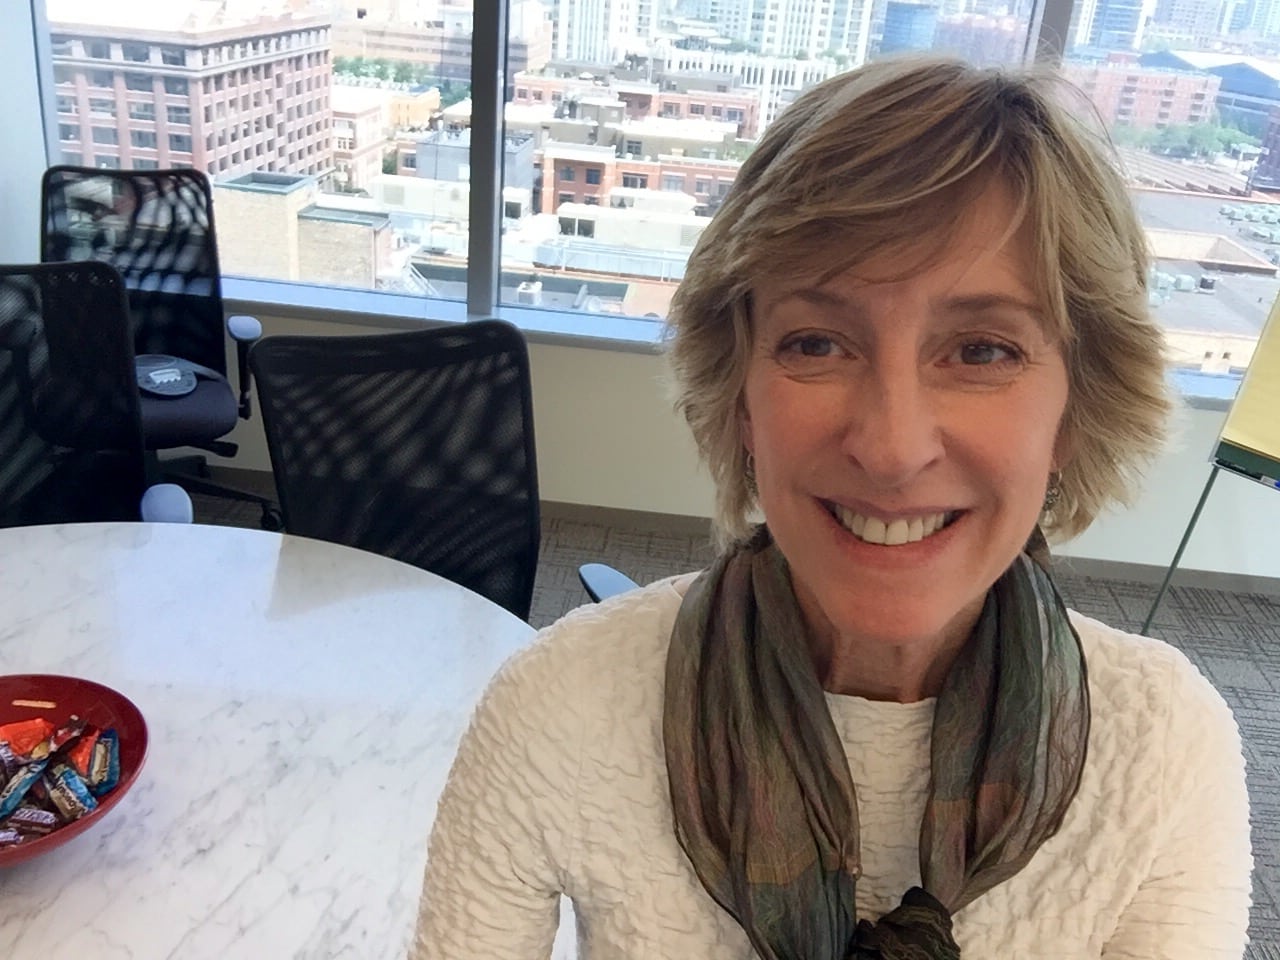 Our President and CEO, Grace Powers, celebrates the new fiscal year with a selfie!